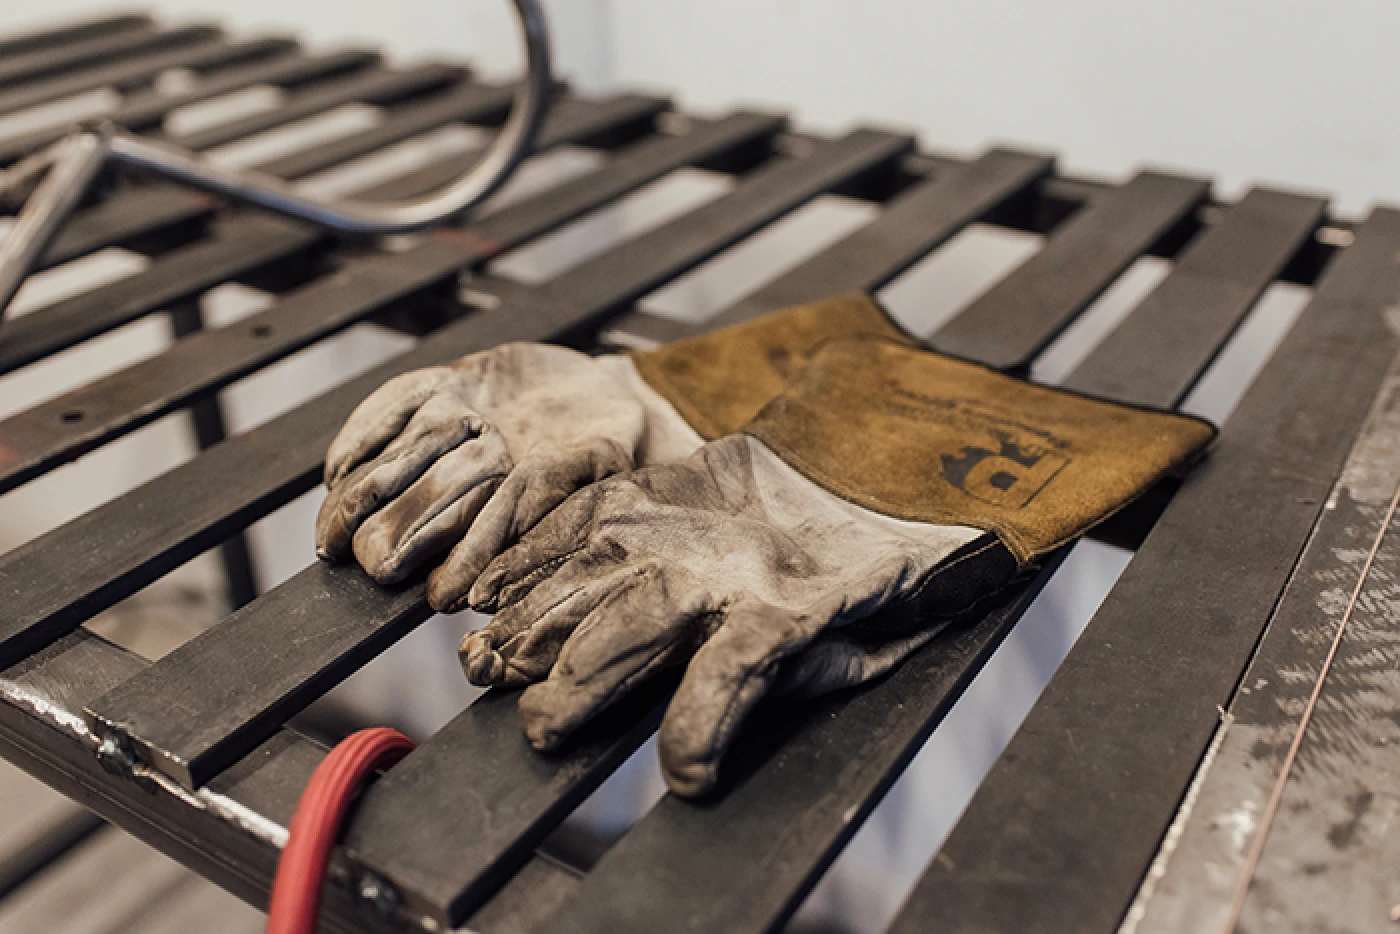 A close up of RichCraft working gloves